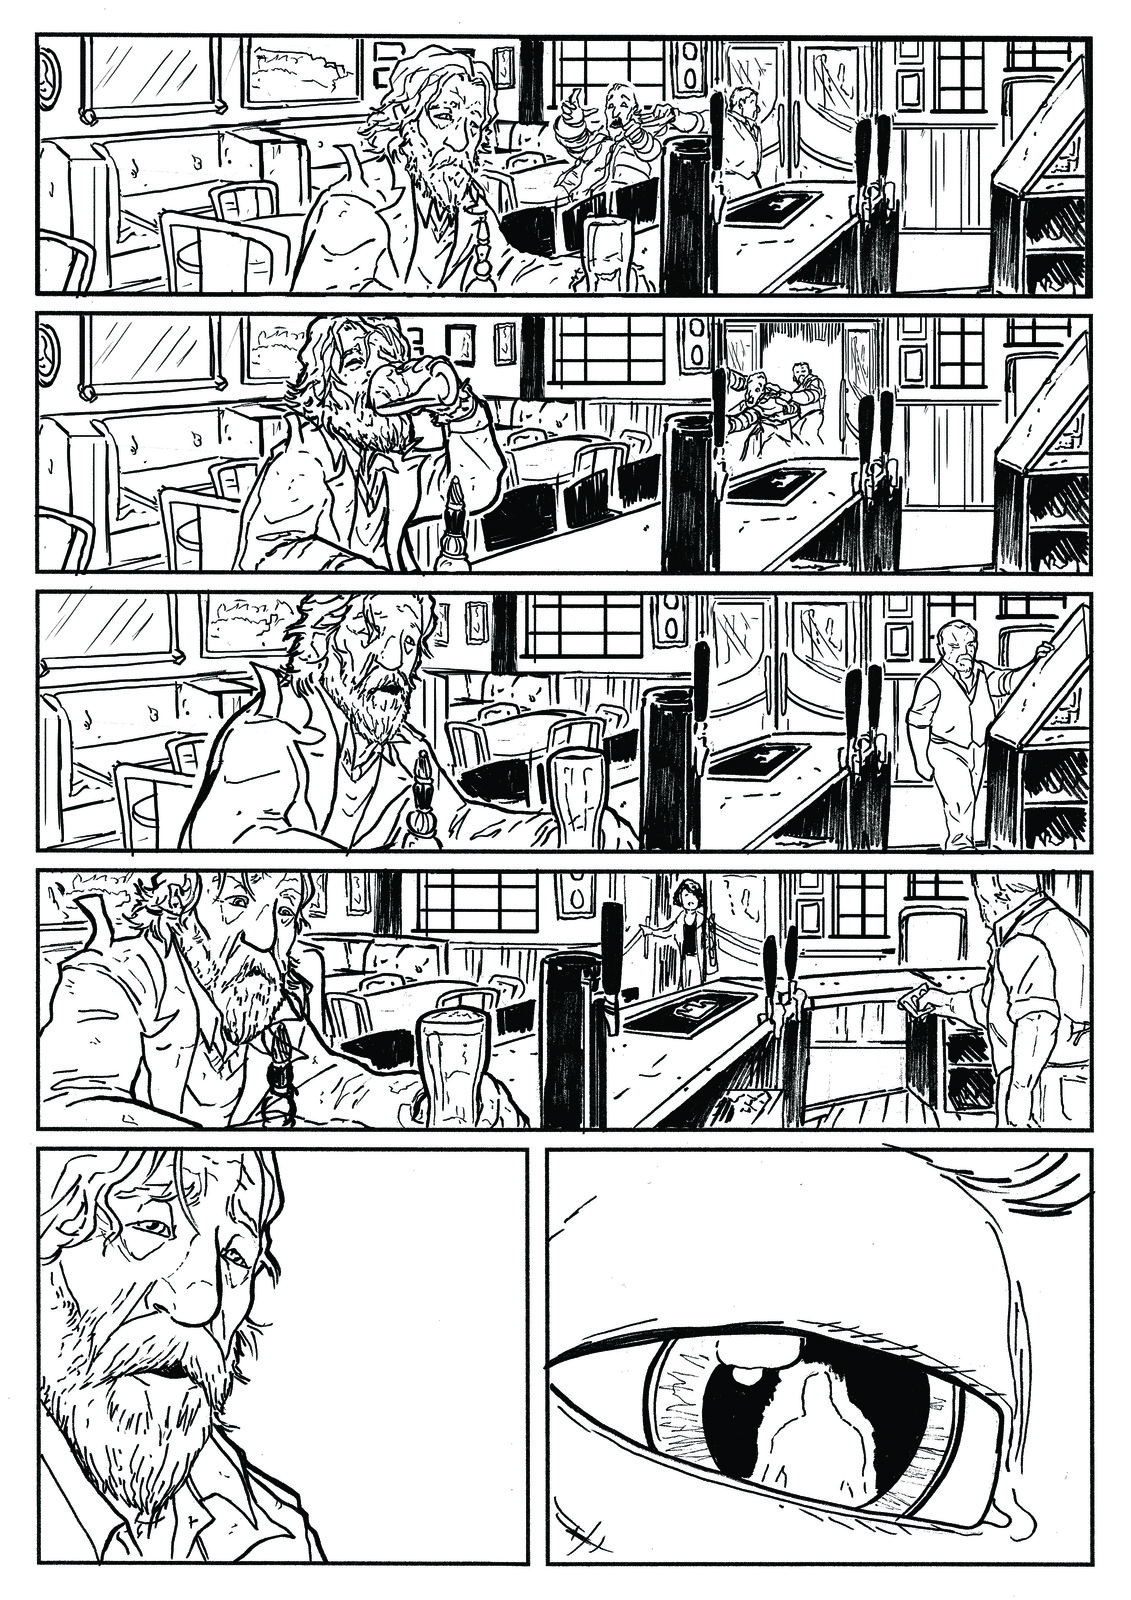 Page 4 Inks